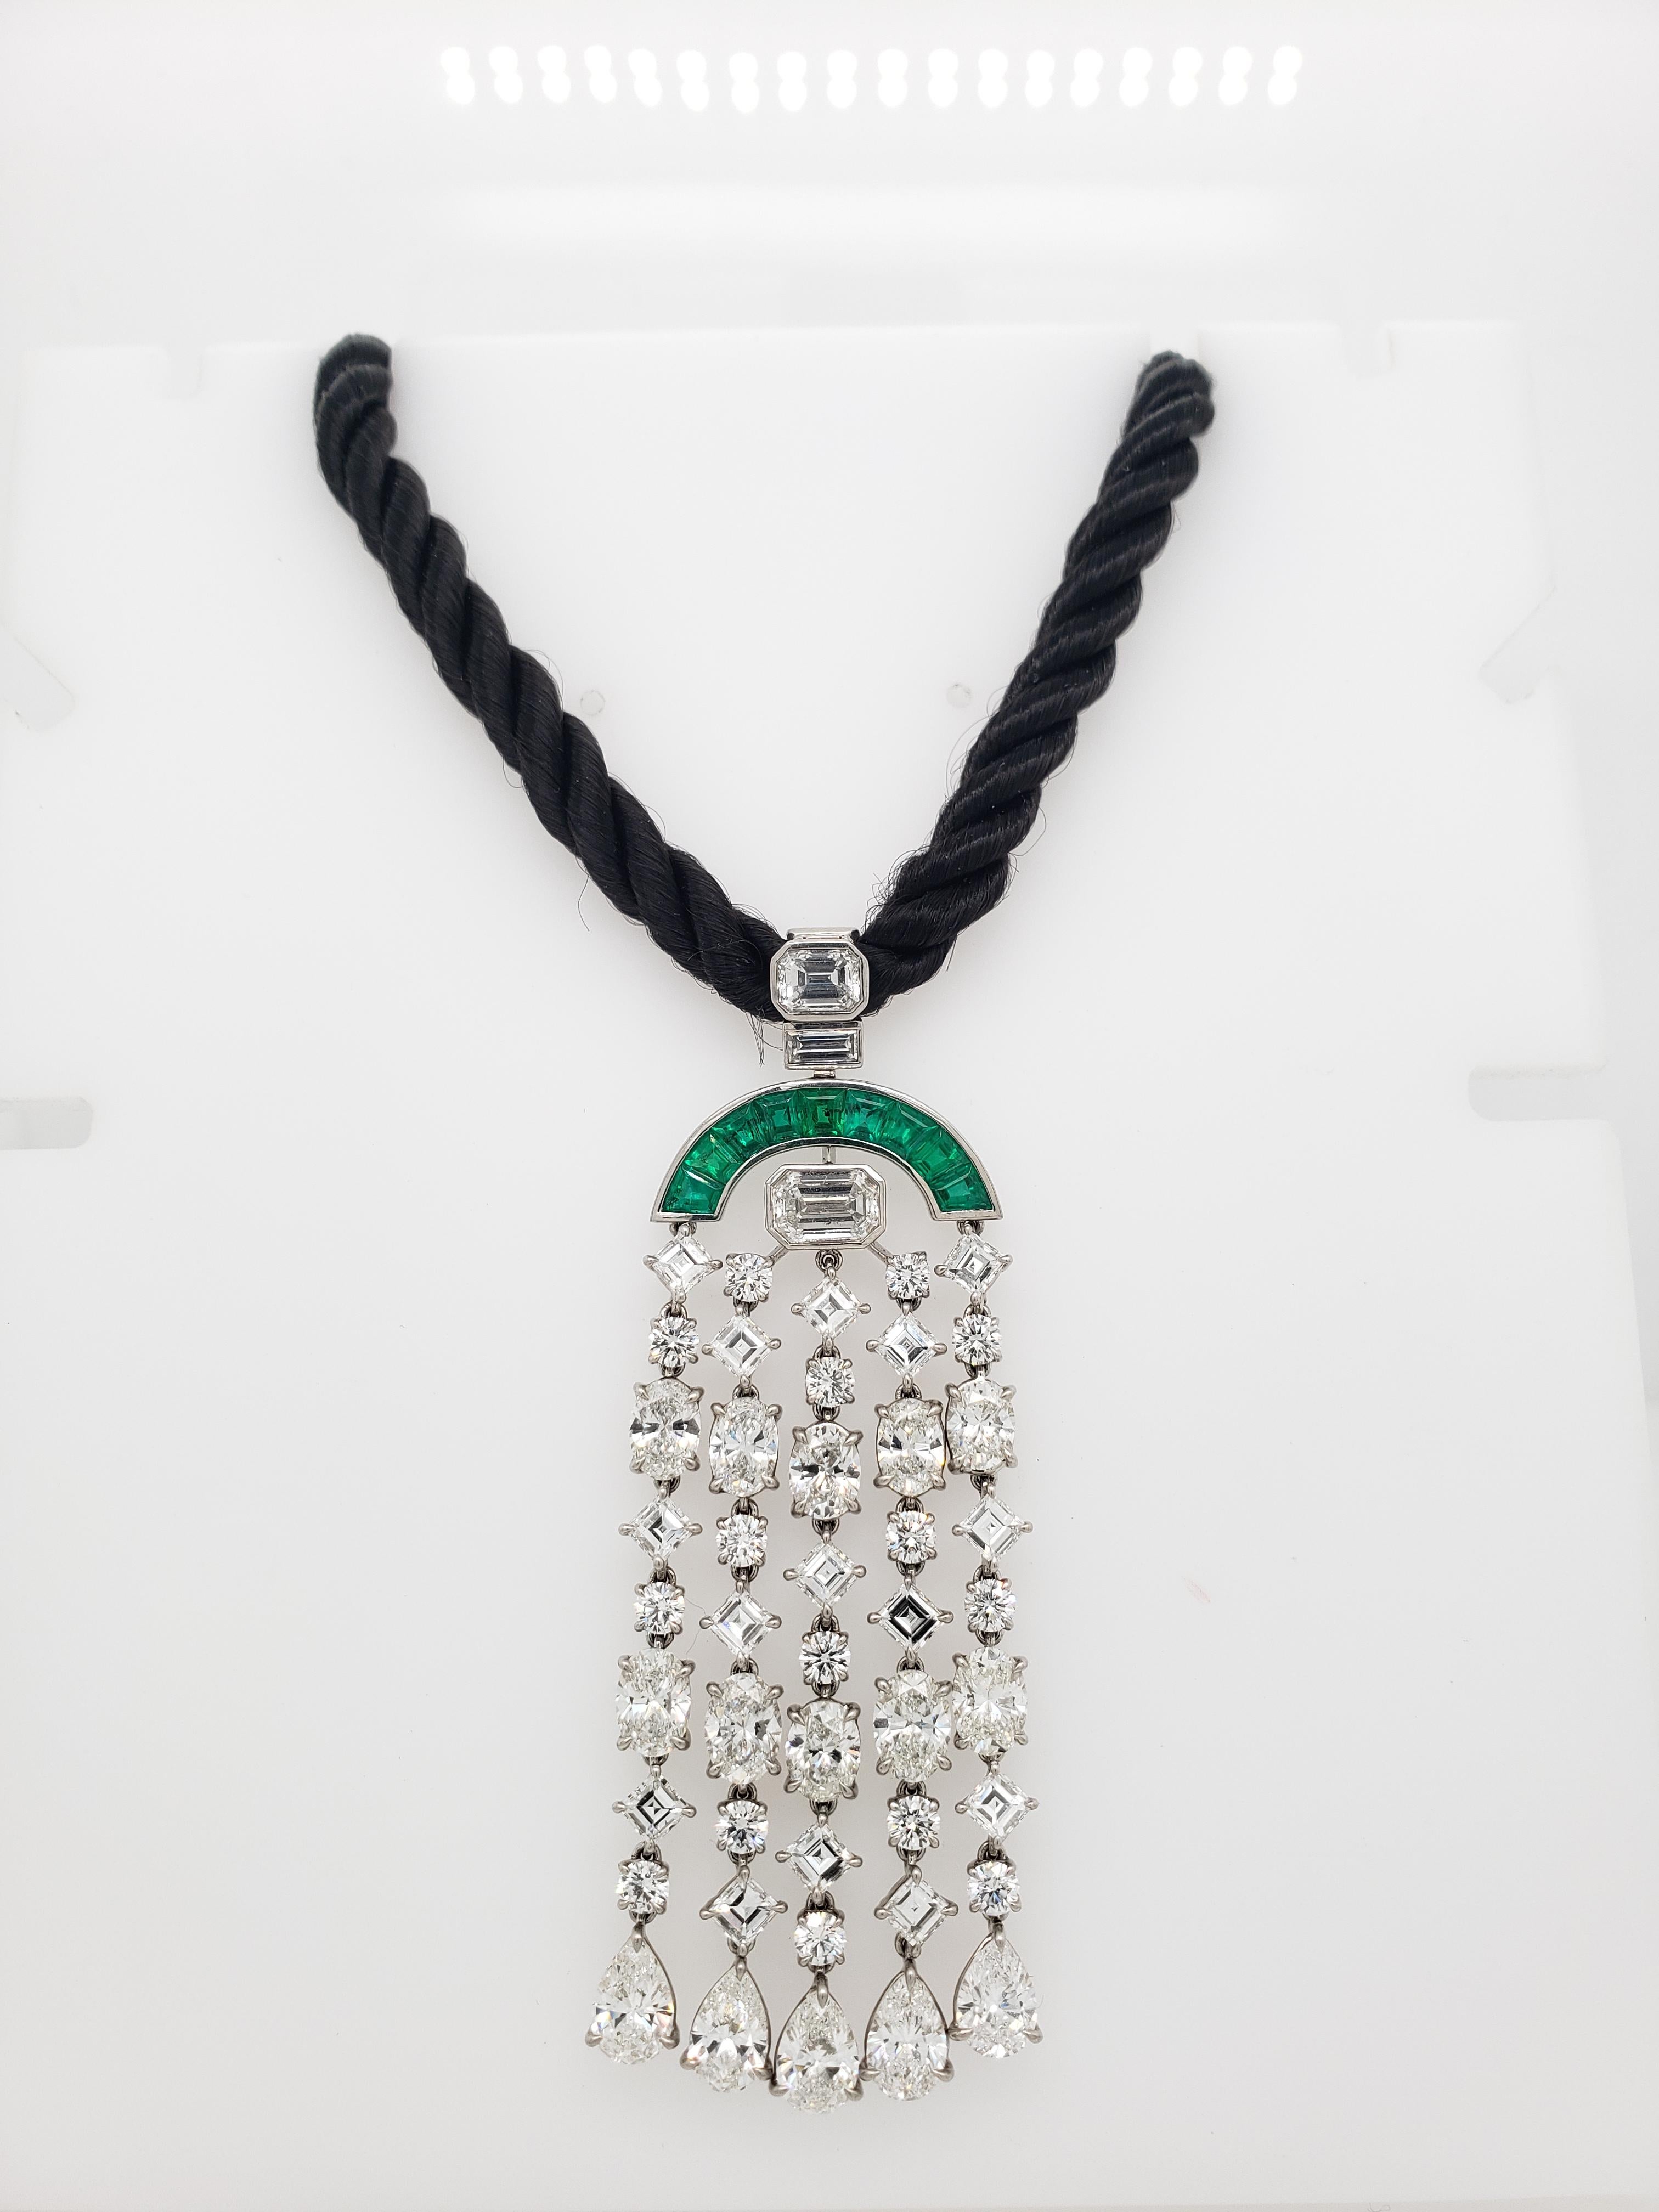 This one of a kind Art Deco Diamond and Emerald Tassle Necklace contains 40 Emerald Cut, Pear, Oval, Round Brilliant Cut, Square Emerald Cut, and Baguettes of collection diamonds colored from D to G. Total Diamond weight is approximately 10.75